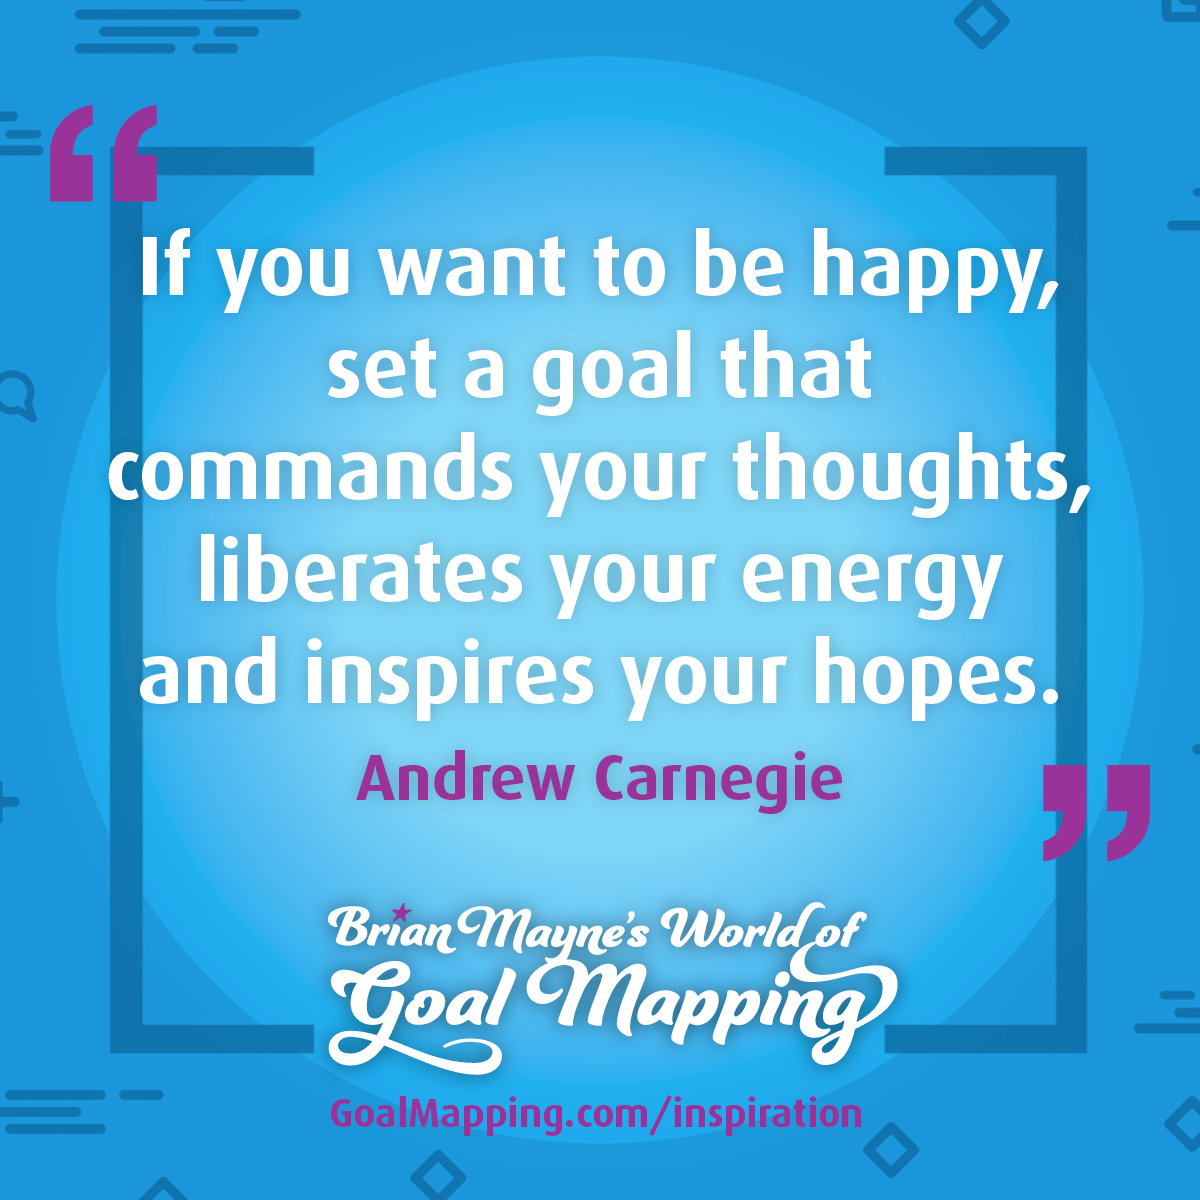 "If you want to be happy, set a goal that commands your thoughts, liberates your energy and inspires your hopes." Andrew Carnegie